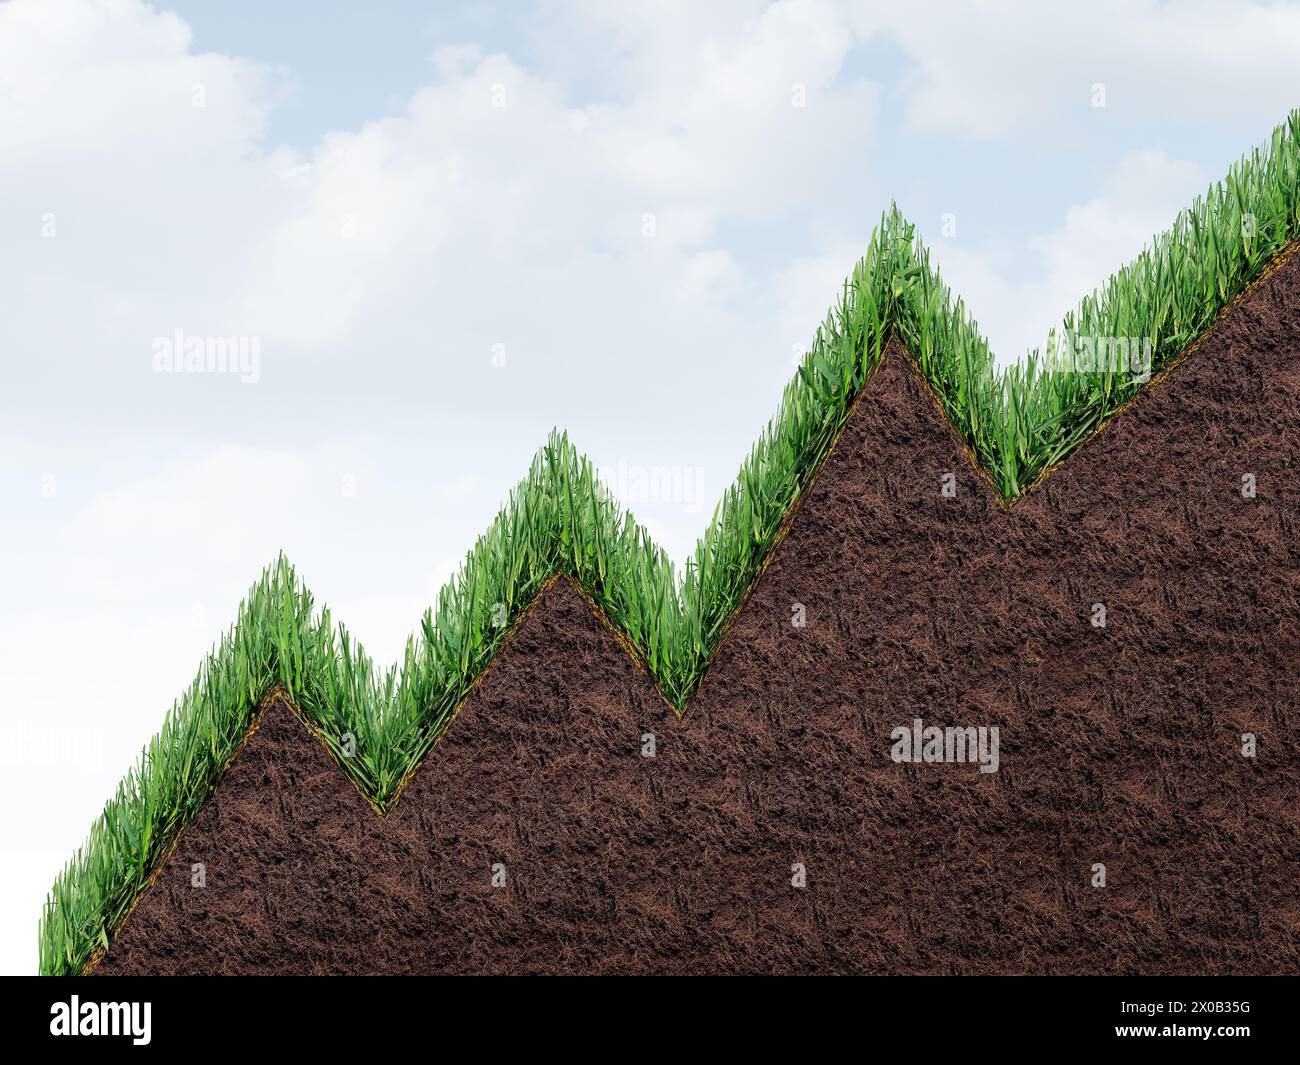 Rising Cost of Lawncare and Increasing expenses of landscaping or rising lawn care prices shaped as an upward graph arrow representing gardening indus Stock Photo